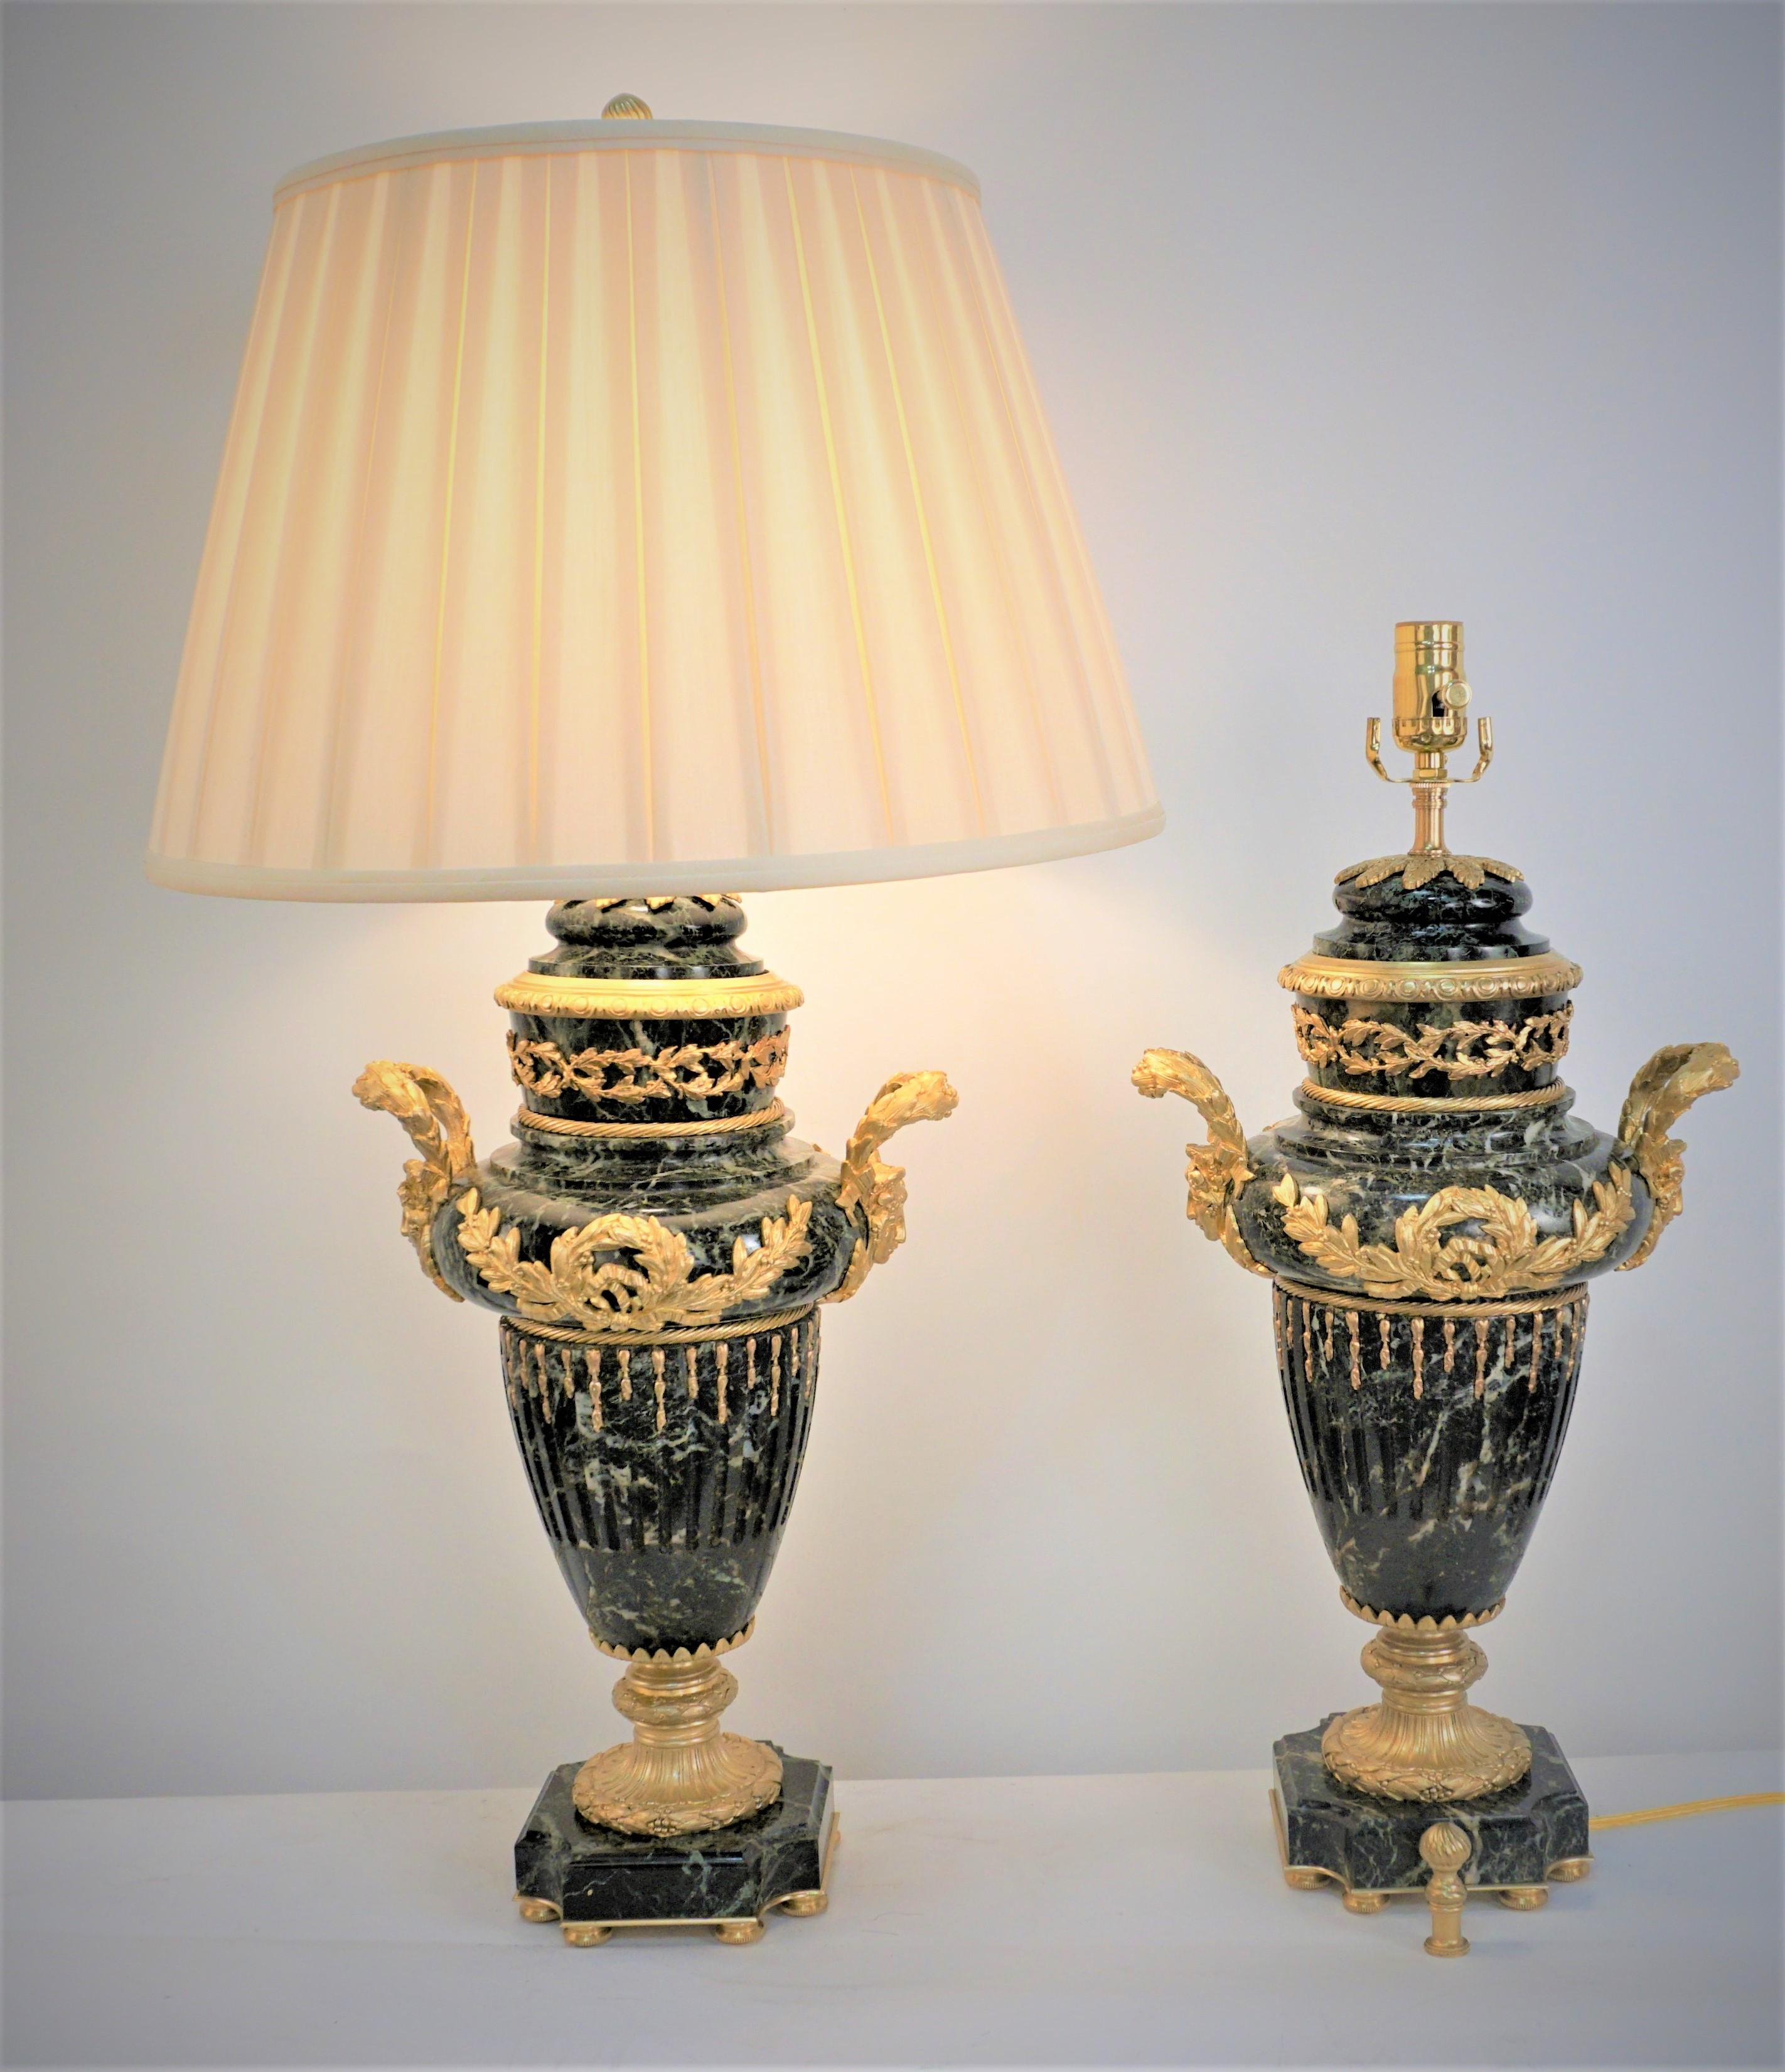 An exceptional pair of French 19th century gilt bronze over black marble with white and green vein urns that have been professionally electrified and have been made to and elegant pair of table lamps and fitted with box please silk lampshades.